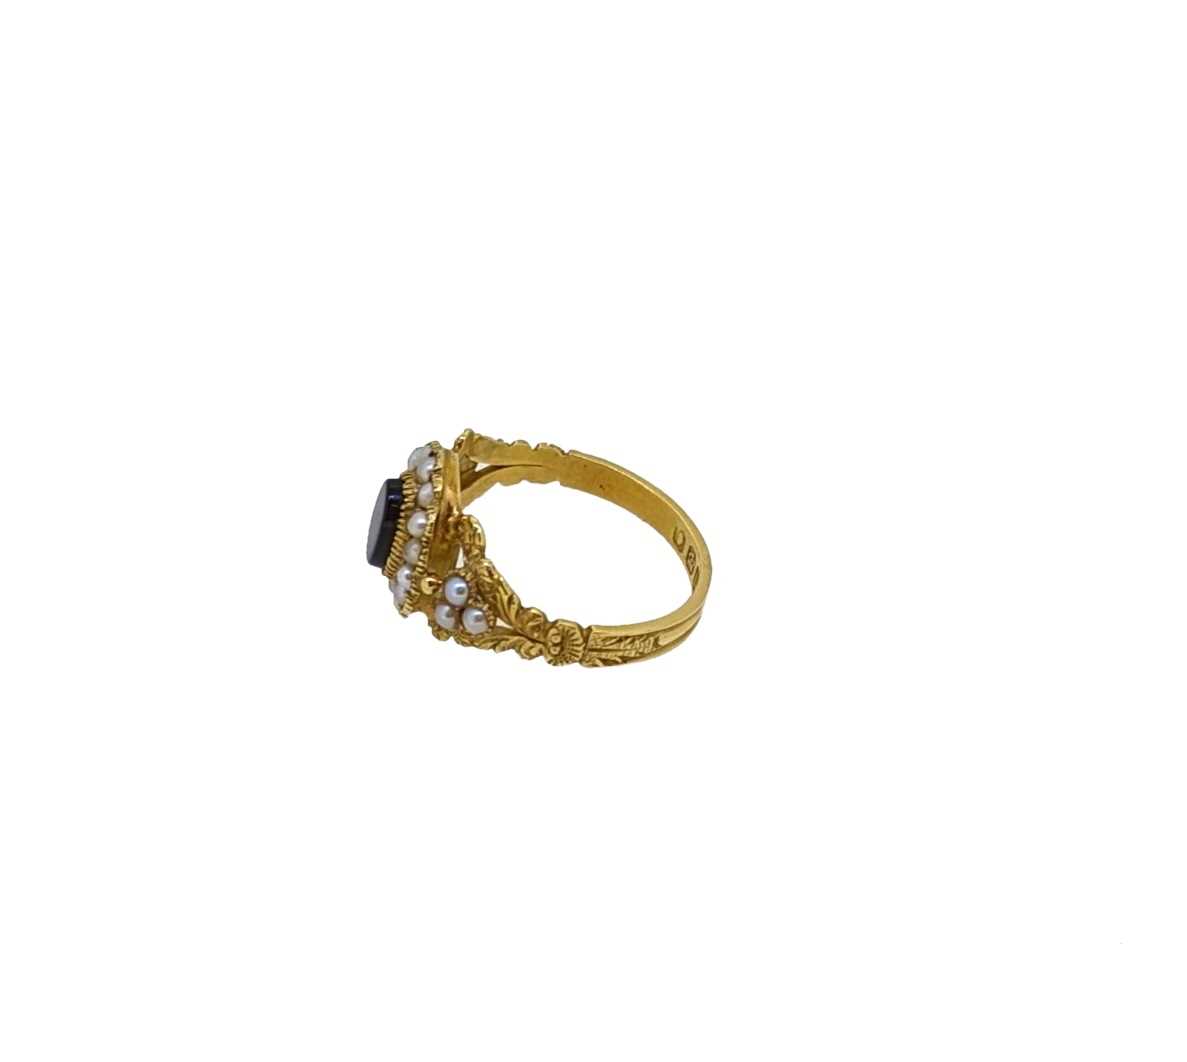 A 19th century mourning ring, - Image 2 of 4